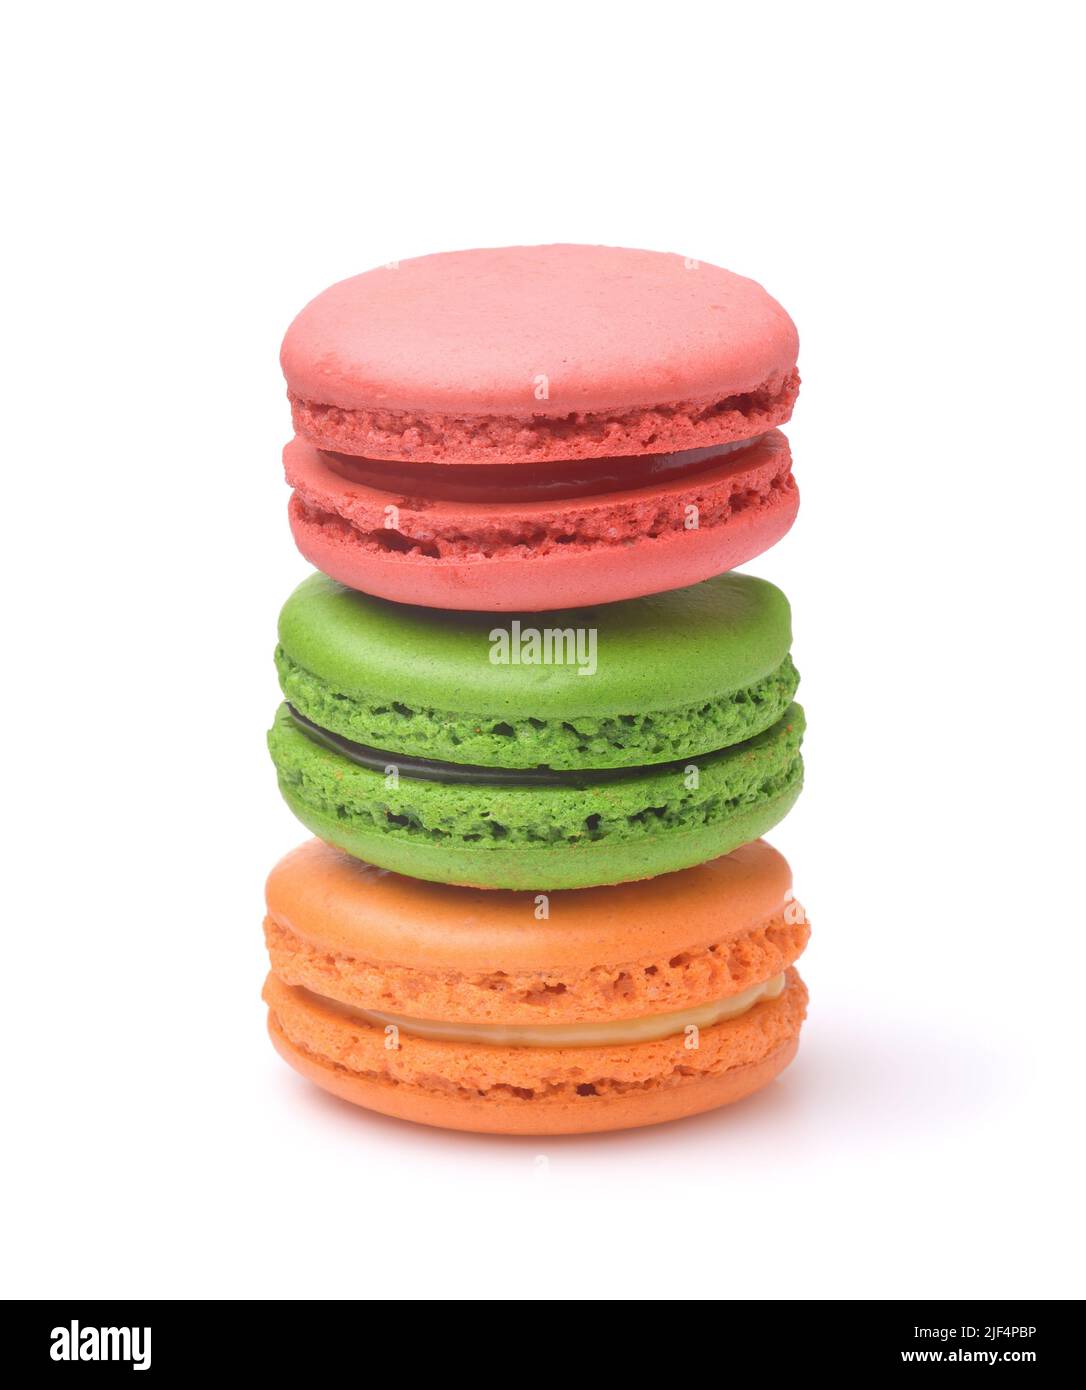 Front view of three colorful macaroons isolated on white Stock Photo